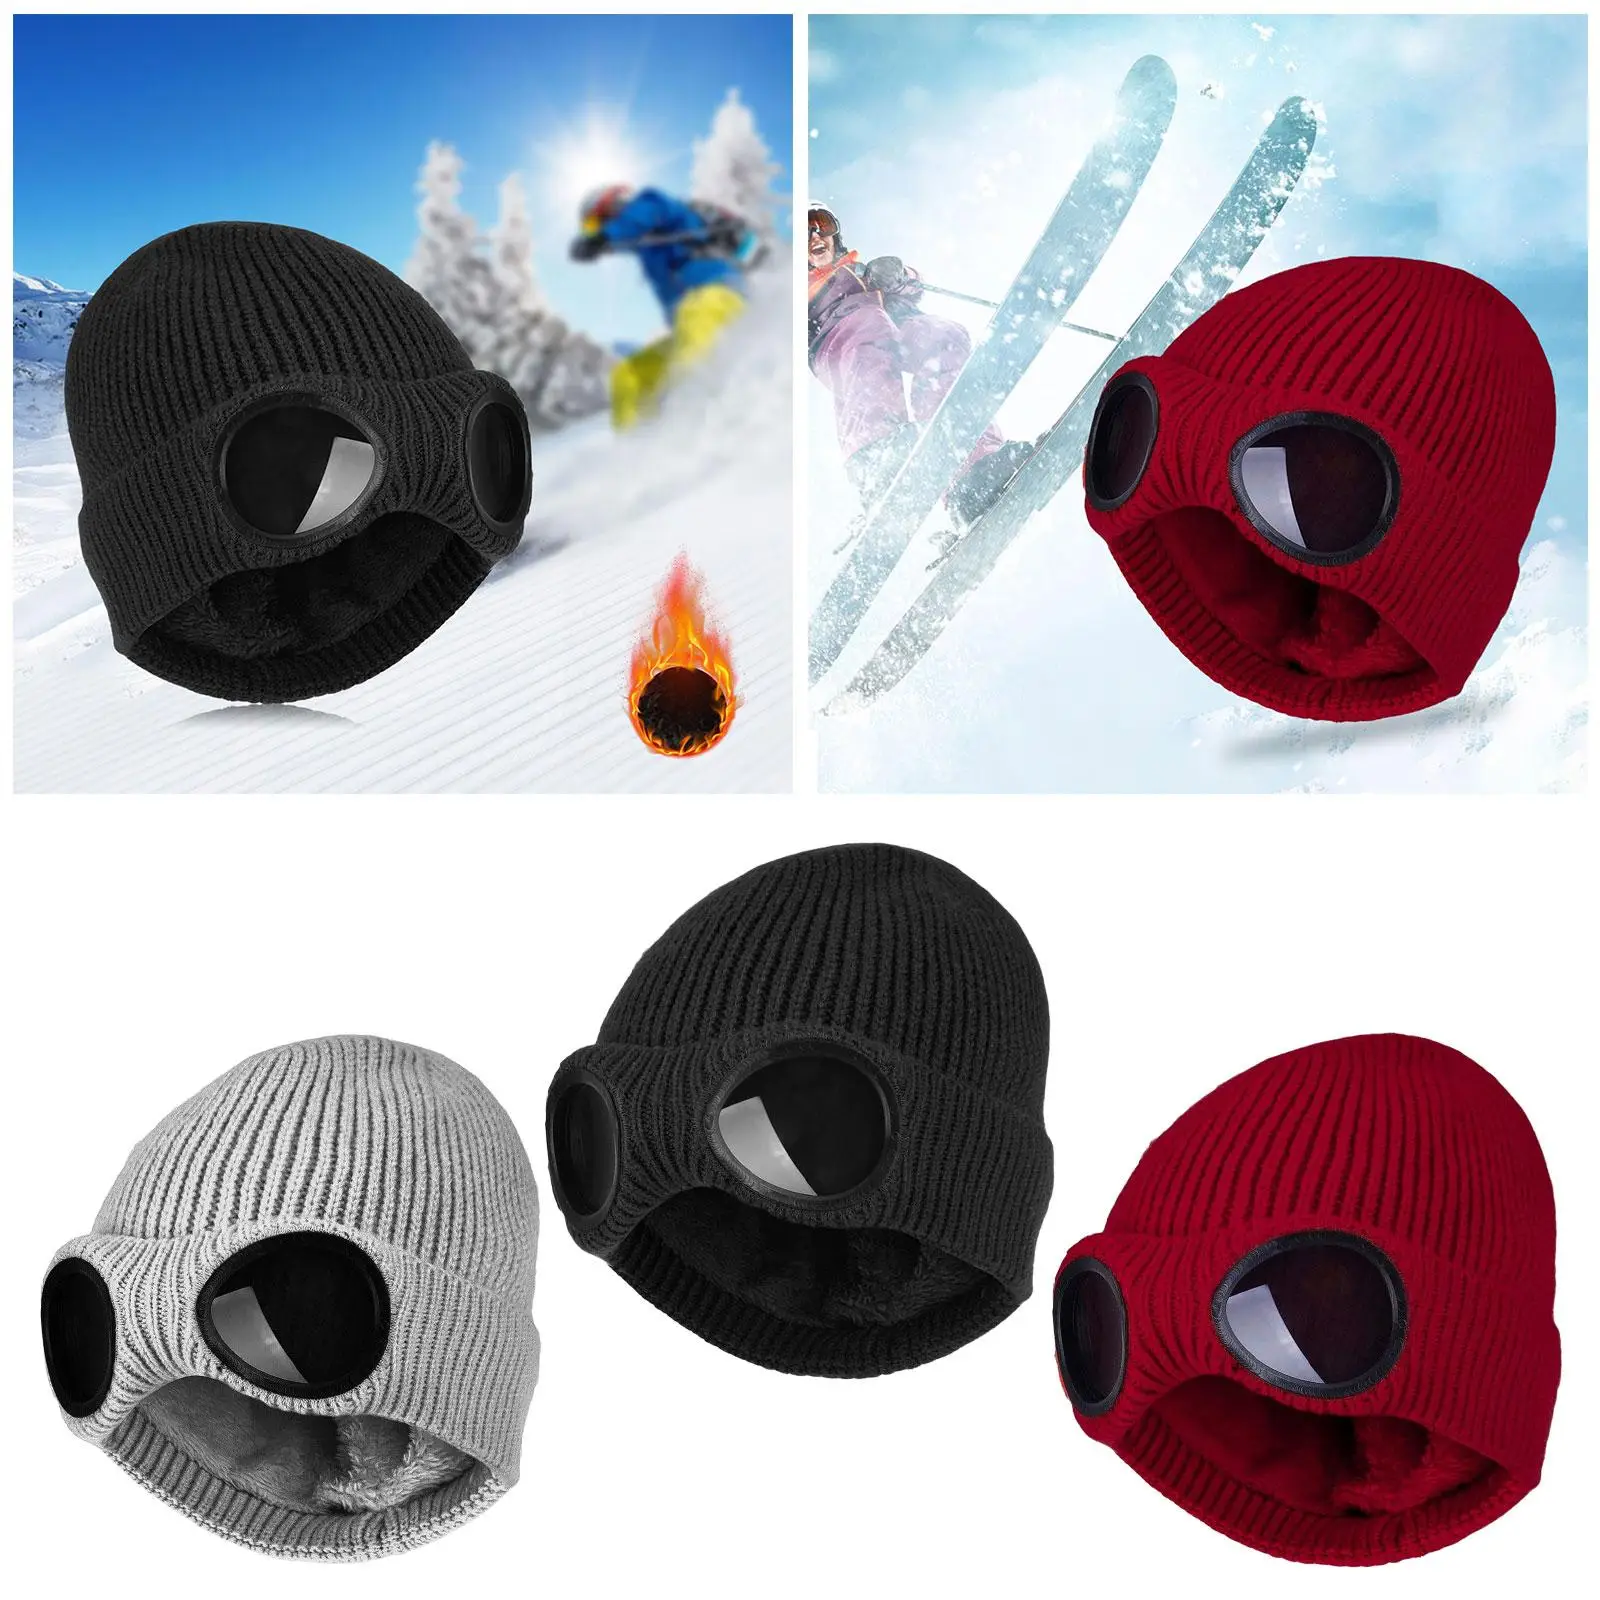 Fashion Winter Warm Knit Hats Thicken Headgear Plush Soft with Glasses Caps for Men Women Girls Boys Hiking Riding Cycling